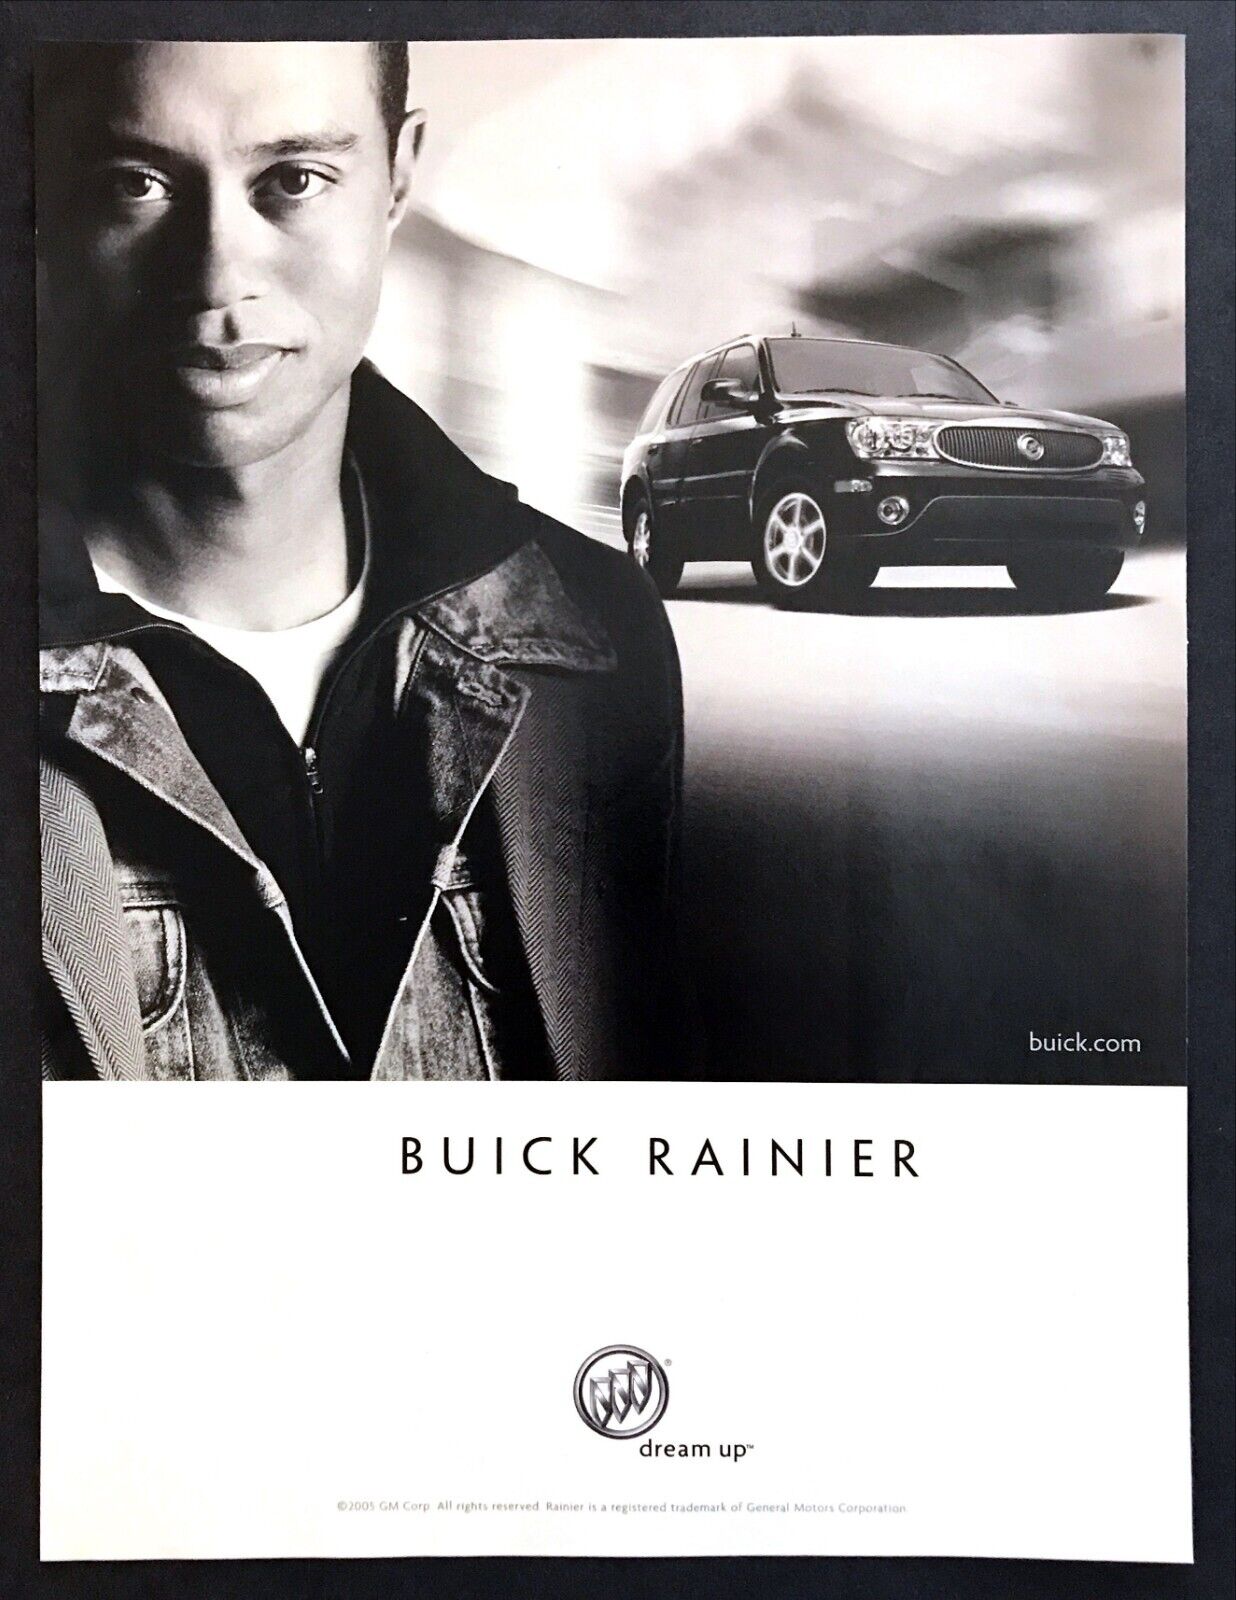 2005 Tiger Woods in Jean Jacket photo Dream Up Buick Rainer SUV promo print ad